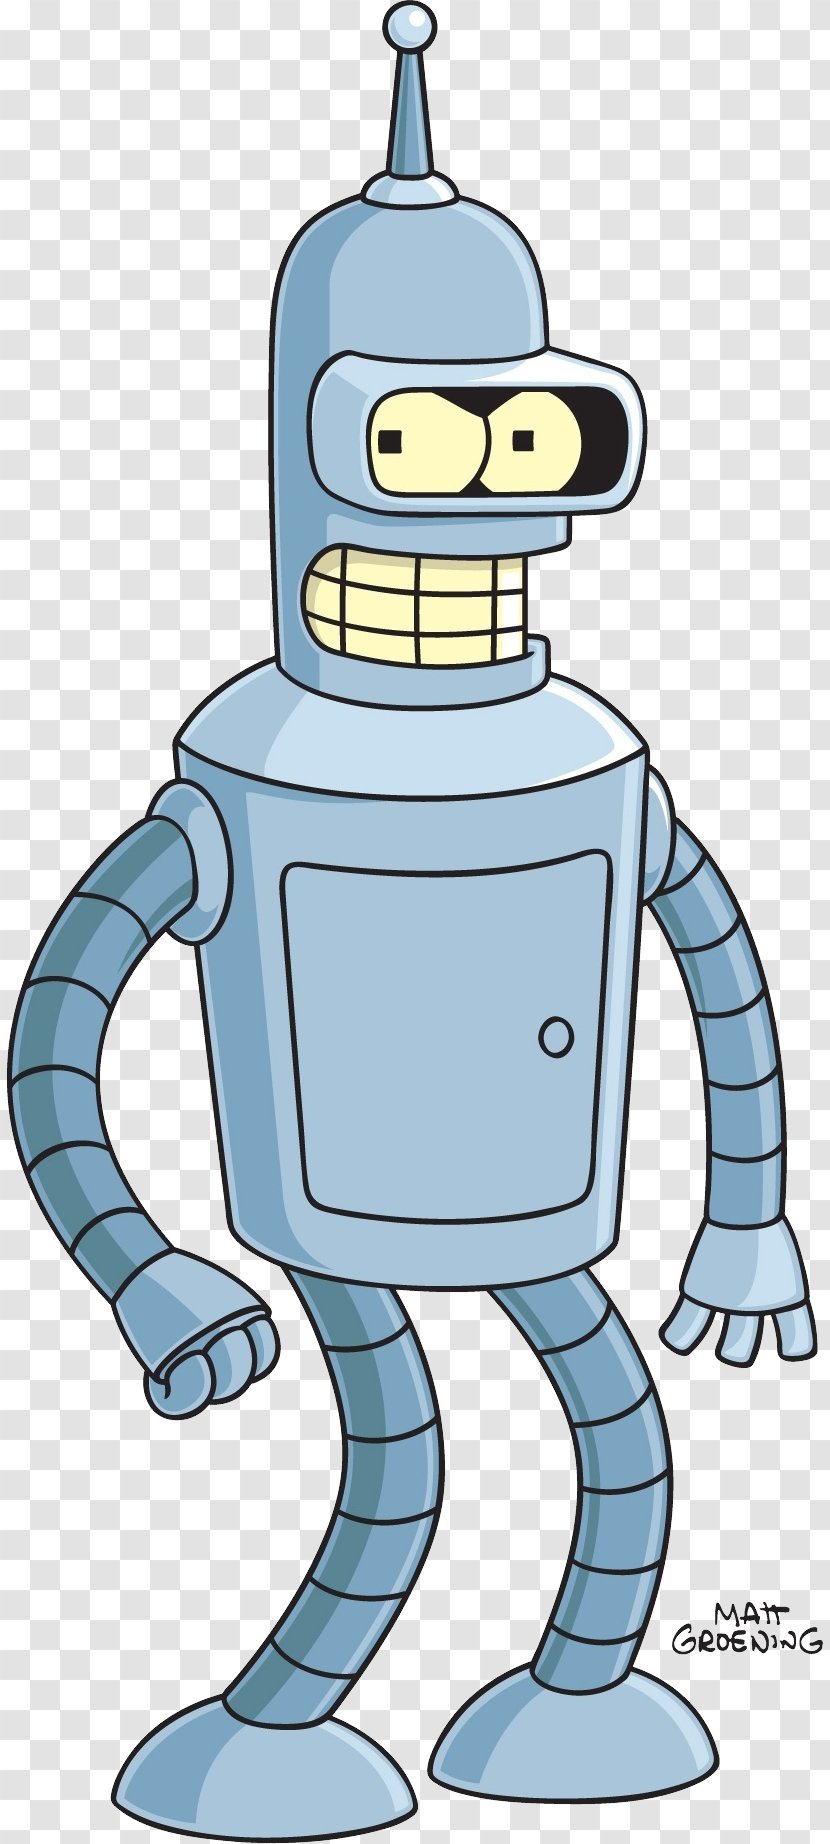 Bender Philip J. Fry HAL 9000 Futurama: Worlds Of Tomorrow YouTube - Fictional Character Transparent PNG